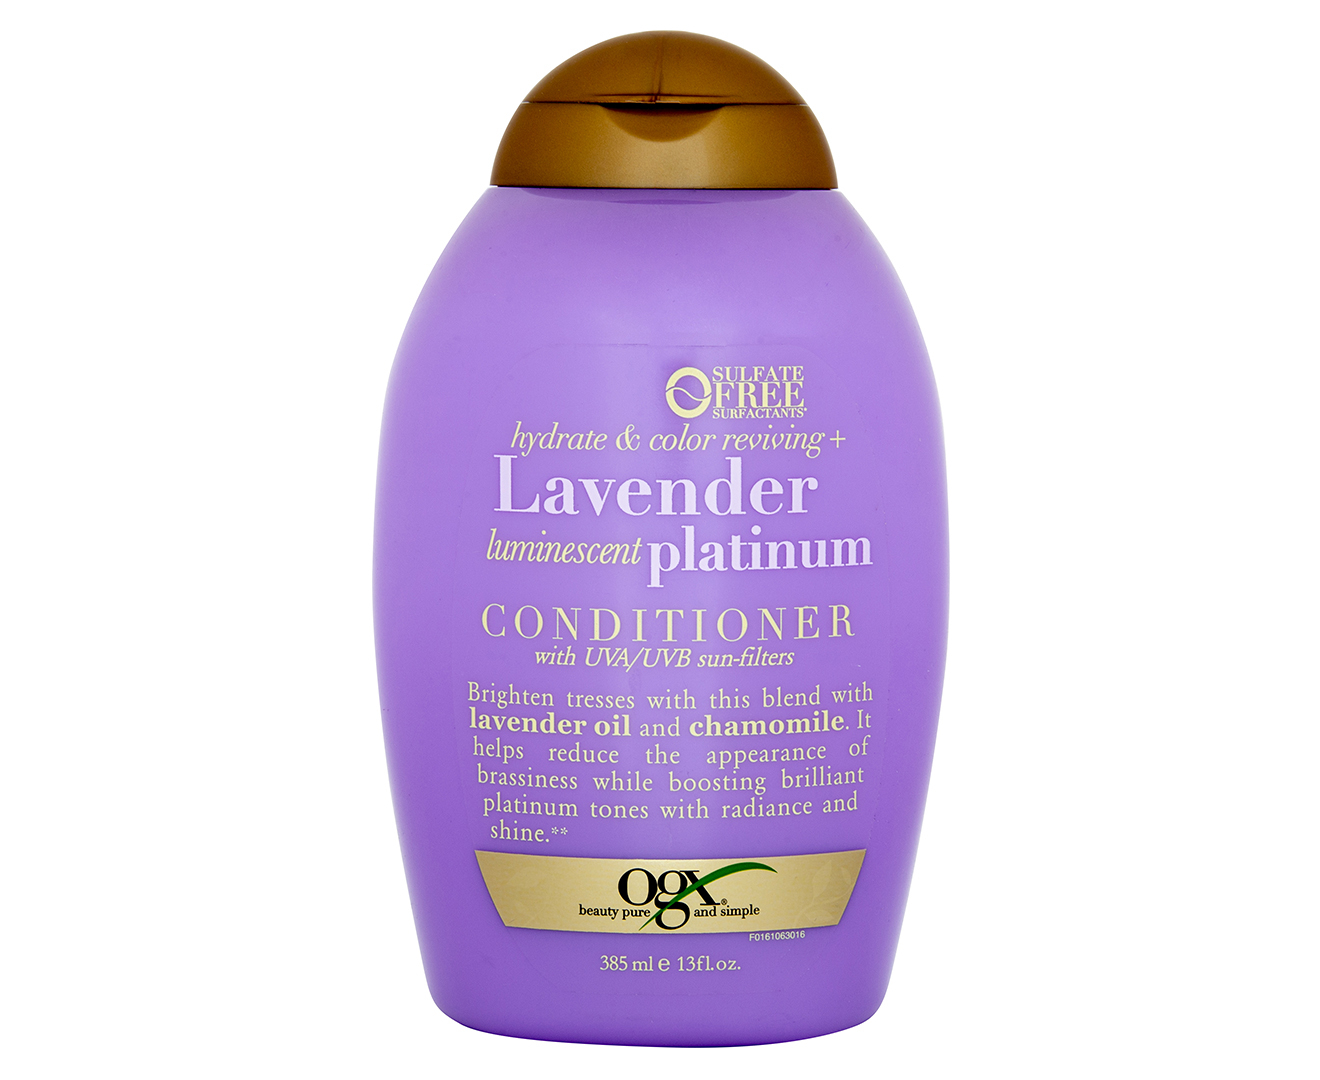 10. OGX Hydrate & Color Reviving + Lavender Luminescent Platinum Conditioner - wide 5